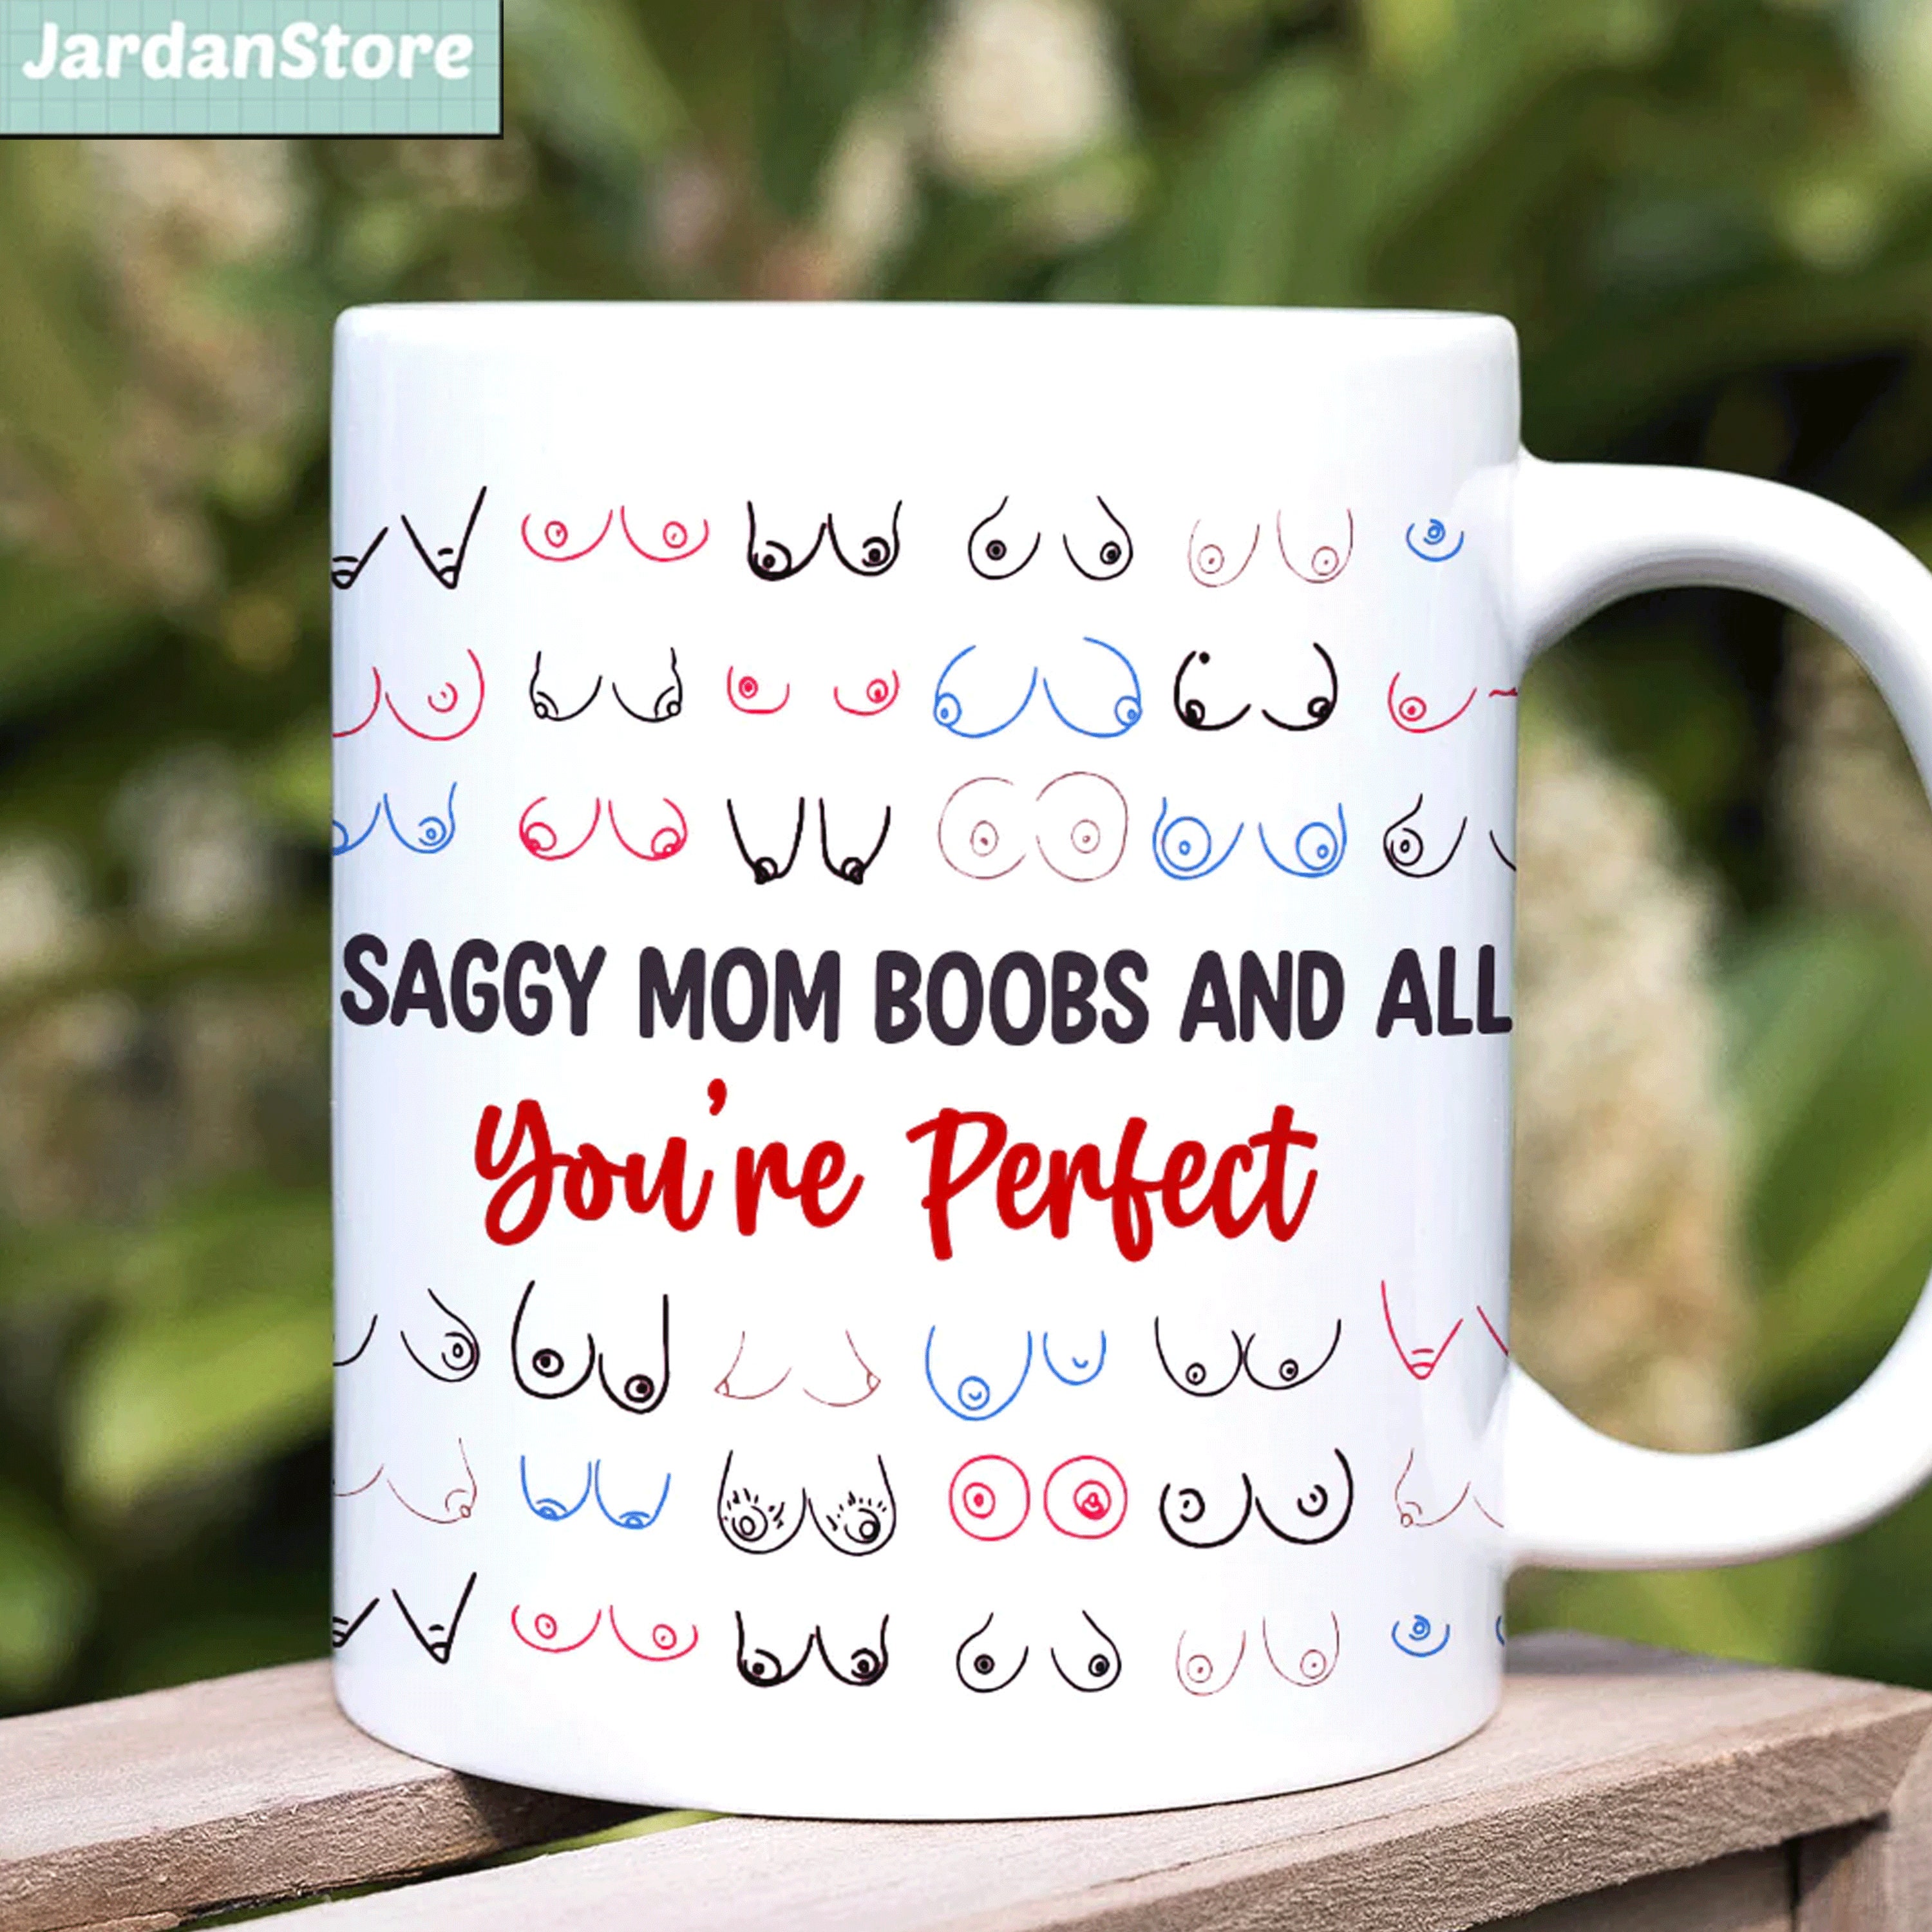 Personalized Mother's Day Gift For Wife Funny Saggy Boobs Breats Mug -  Vista Stars - Personalized gifts for the loved ones